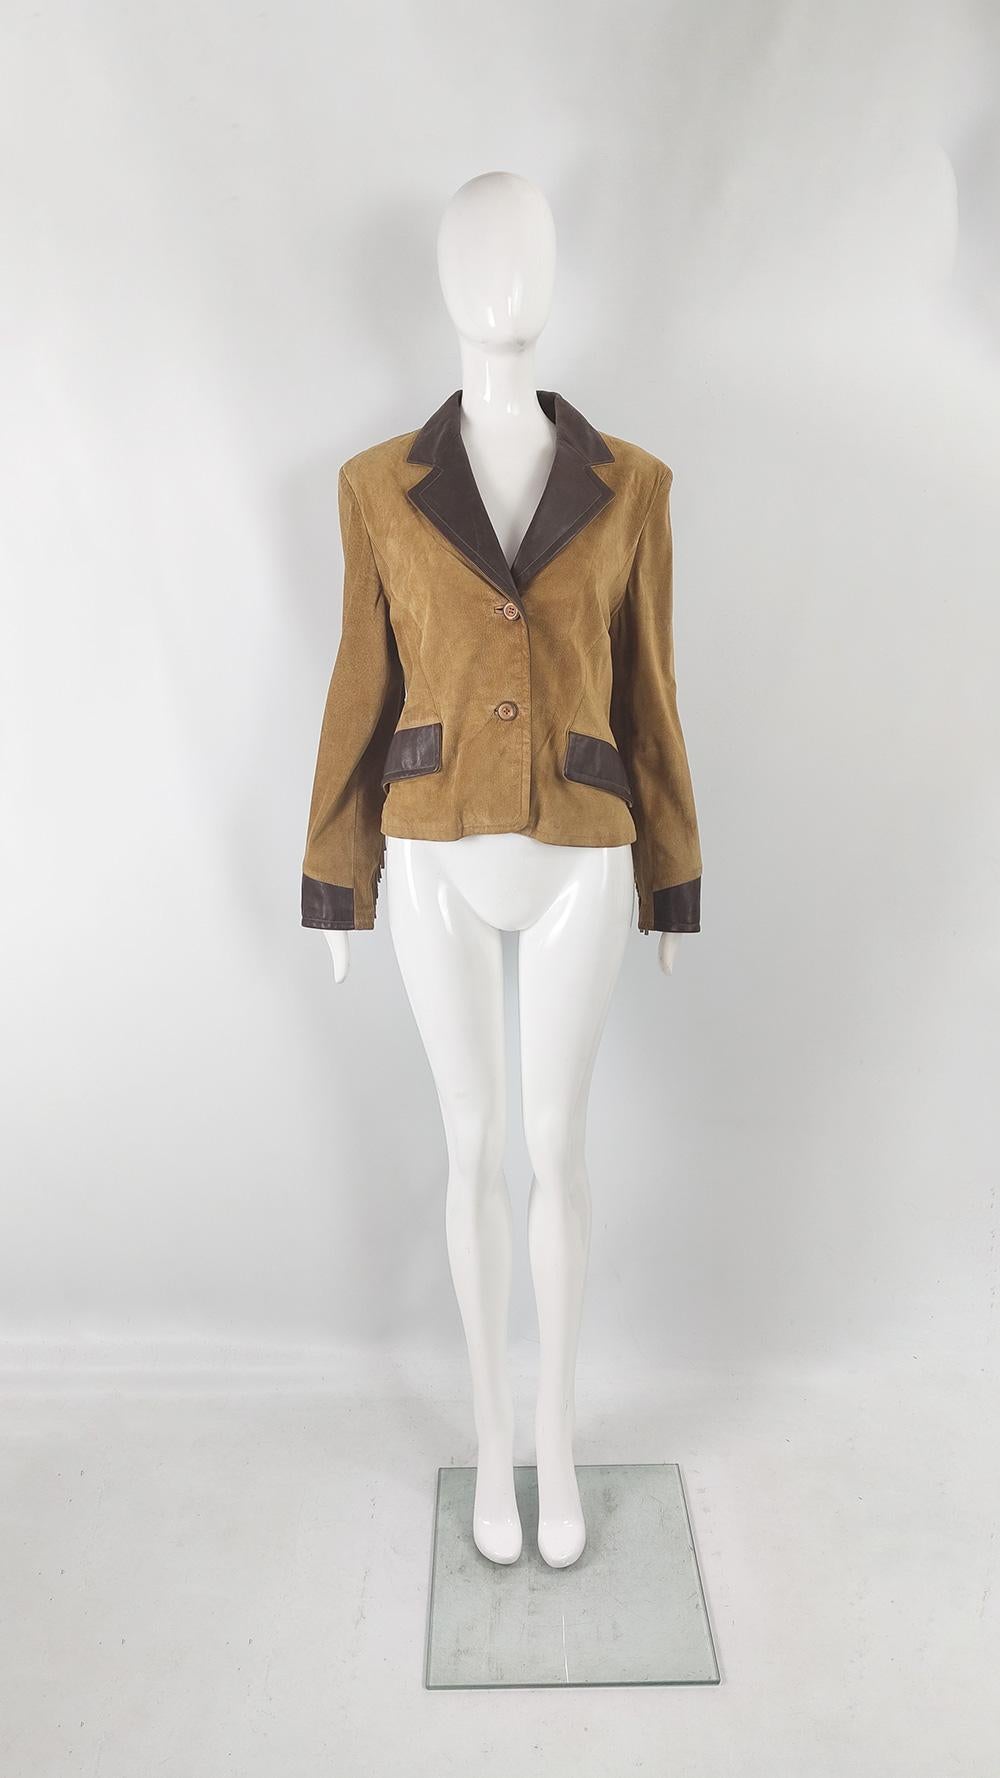 An incredibly cool vintage women's fringe coat from the 80s by luxury Italian label, Byblos - a division of Genny and a label that Gianni Versace was the head designer of in the 70s. In a real, dark brown Italian leather and a tan suede with